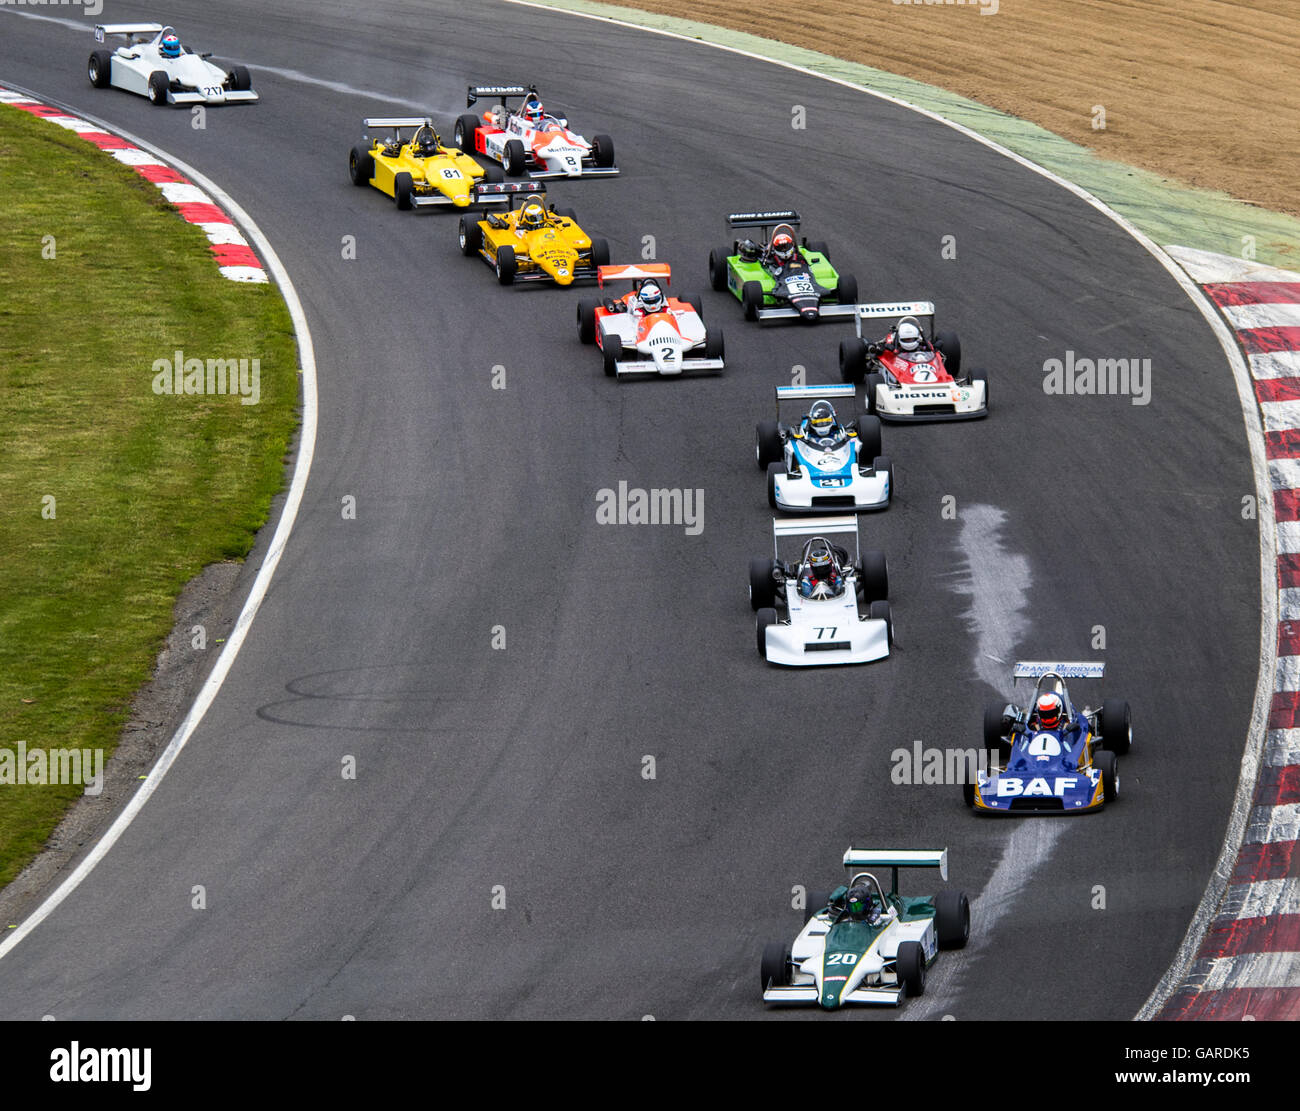 Cars racing on track in the Classic Formula 3 race at Brands Hatch, Legends of Brands Hatch Superprix Stock Photo